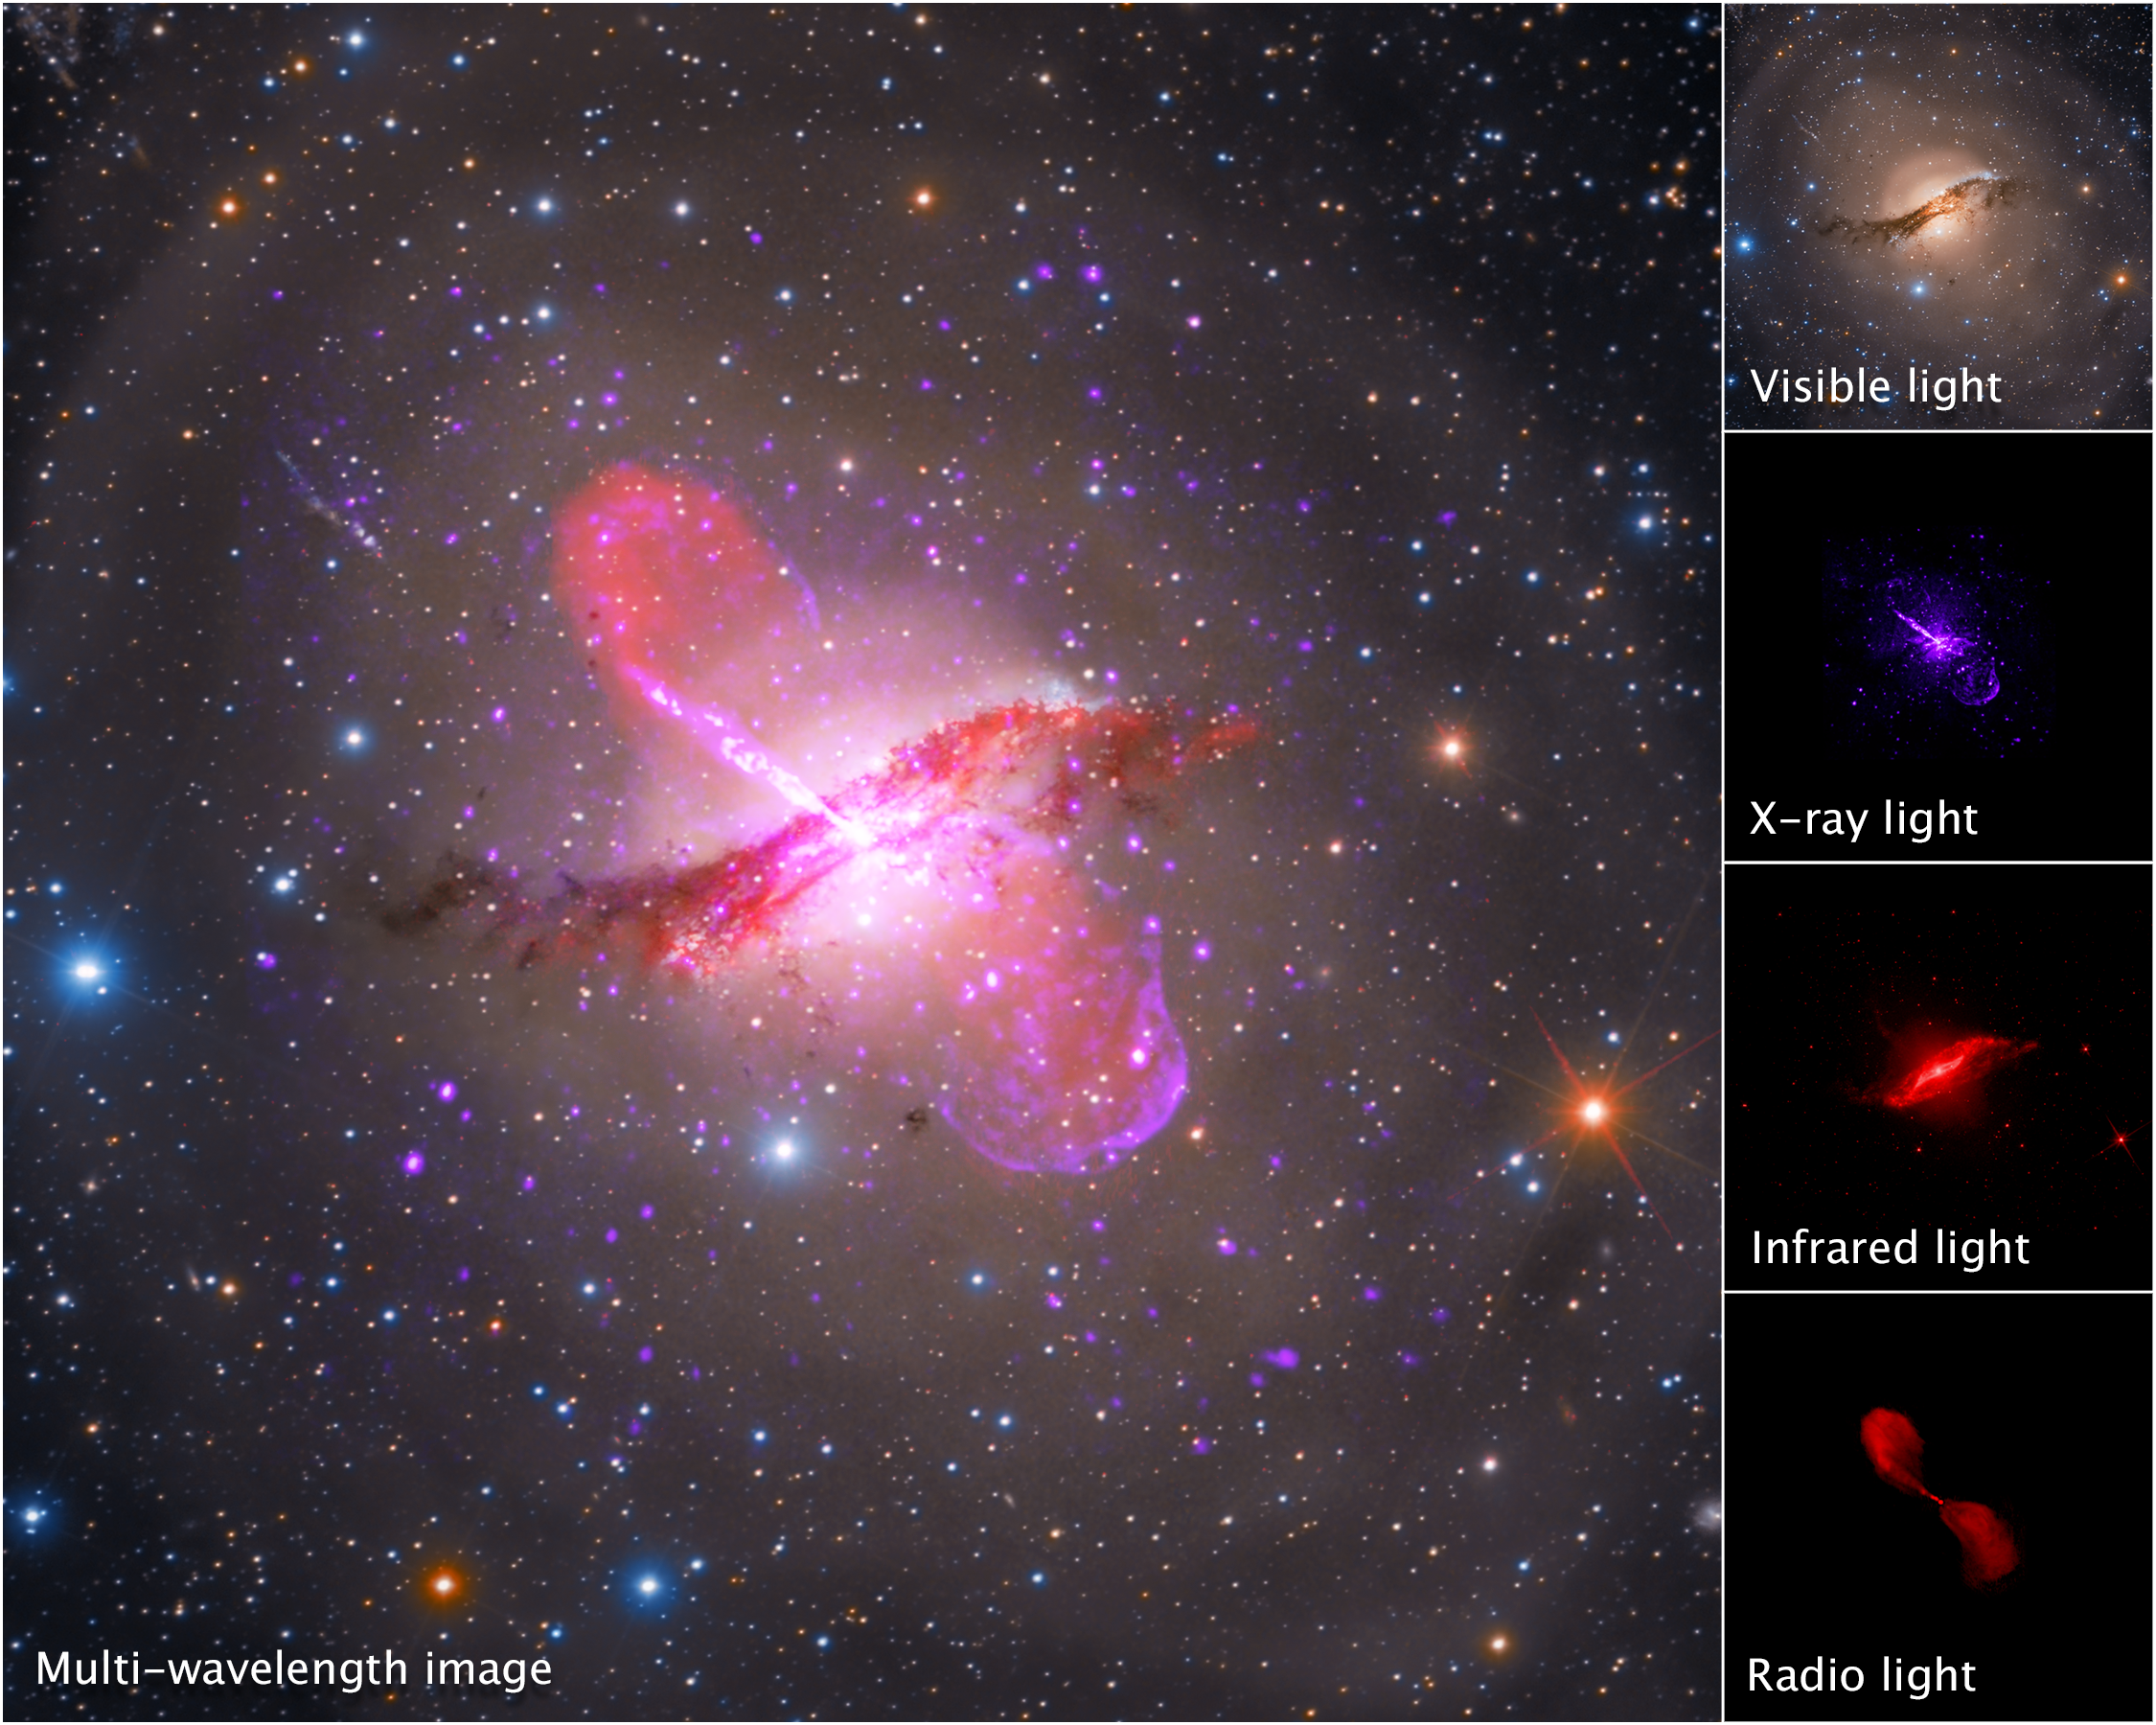 Super Telescope Captures Images of a Plasma Jet Emitting from Black Hole at 16-Times Greater Resolution